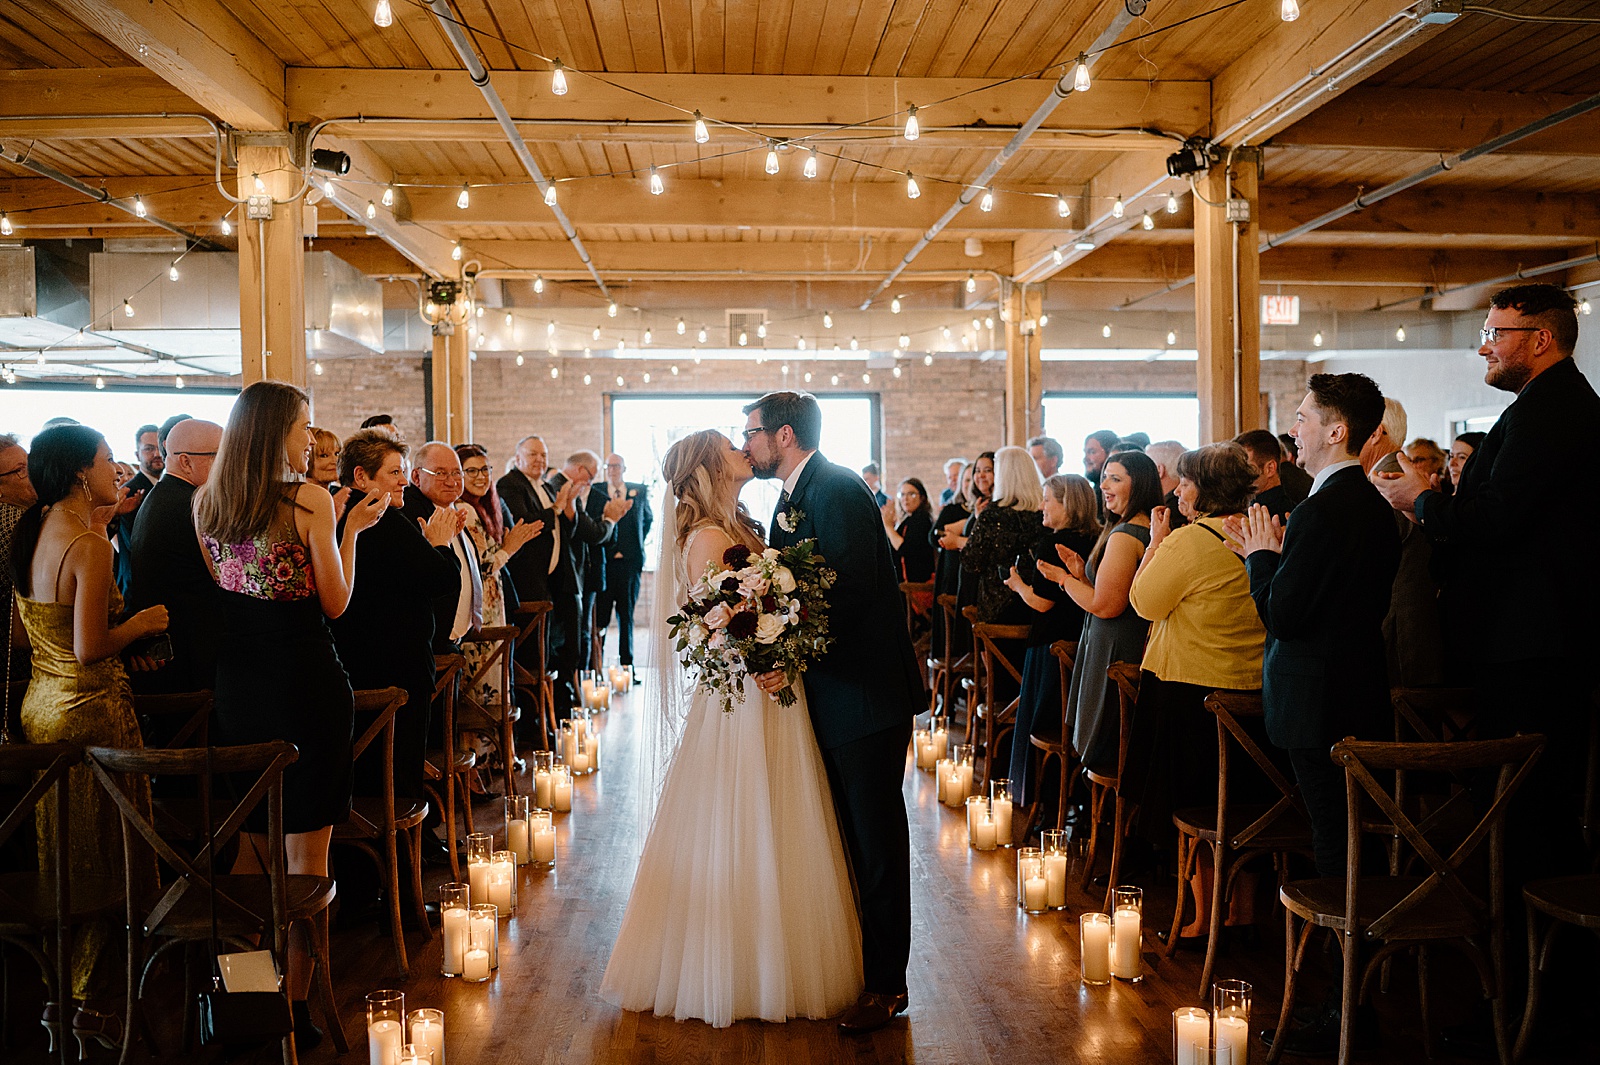 Newlyweds kiss at the end of the aisle at Chicago venue 